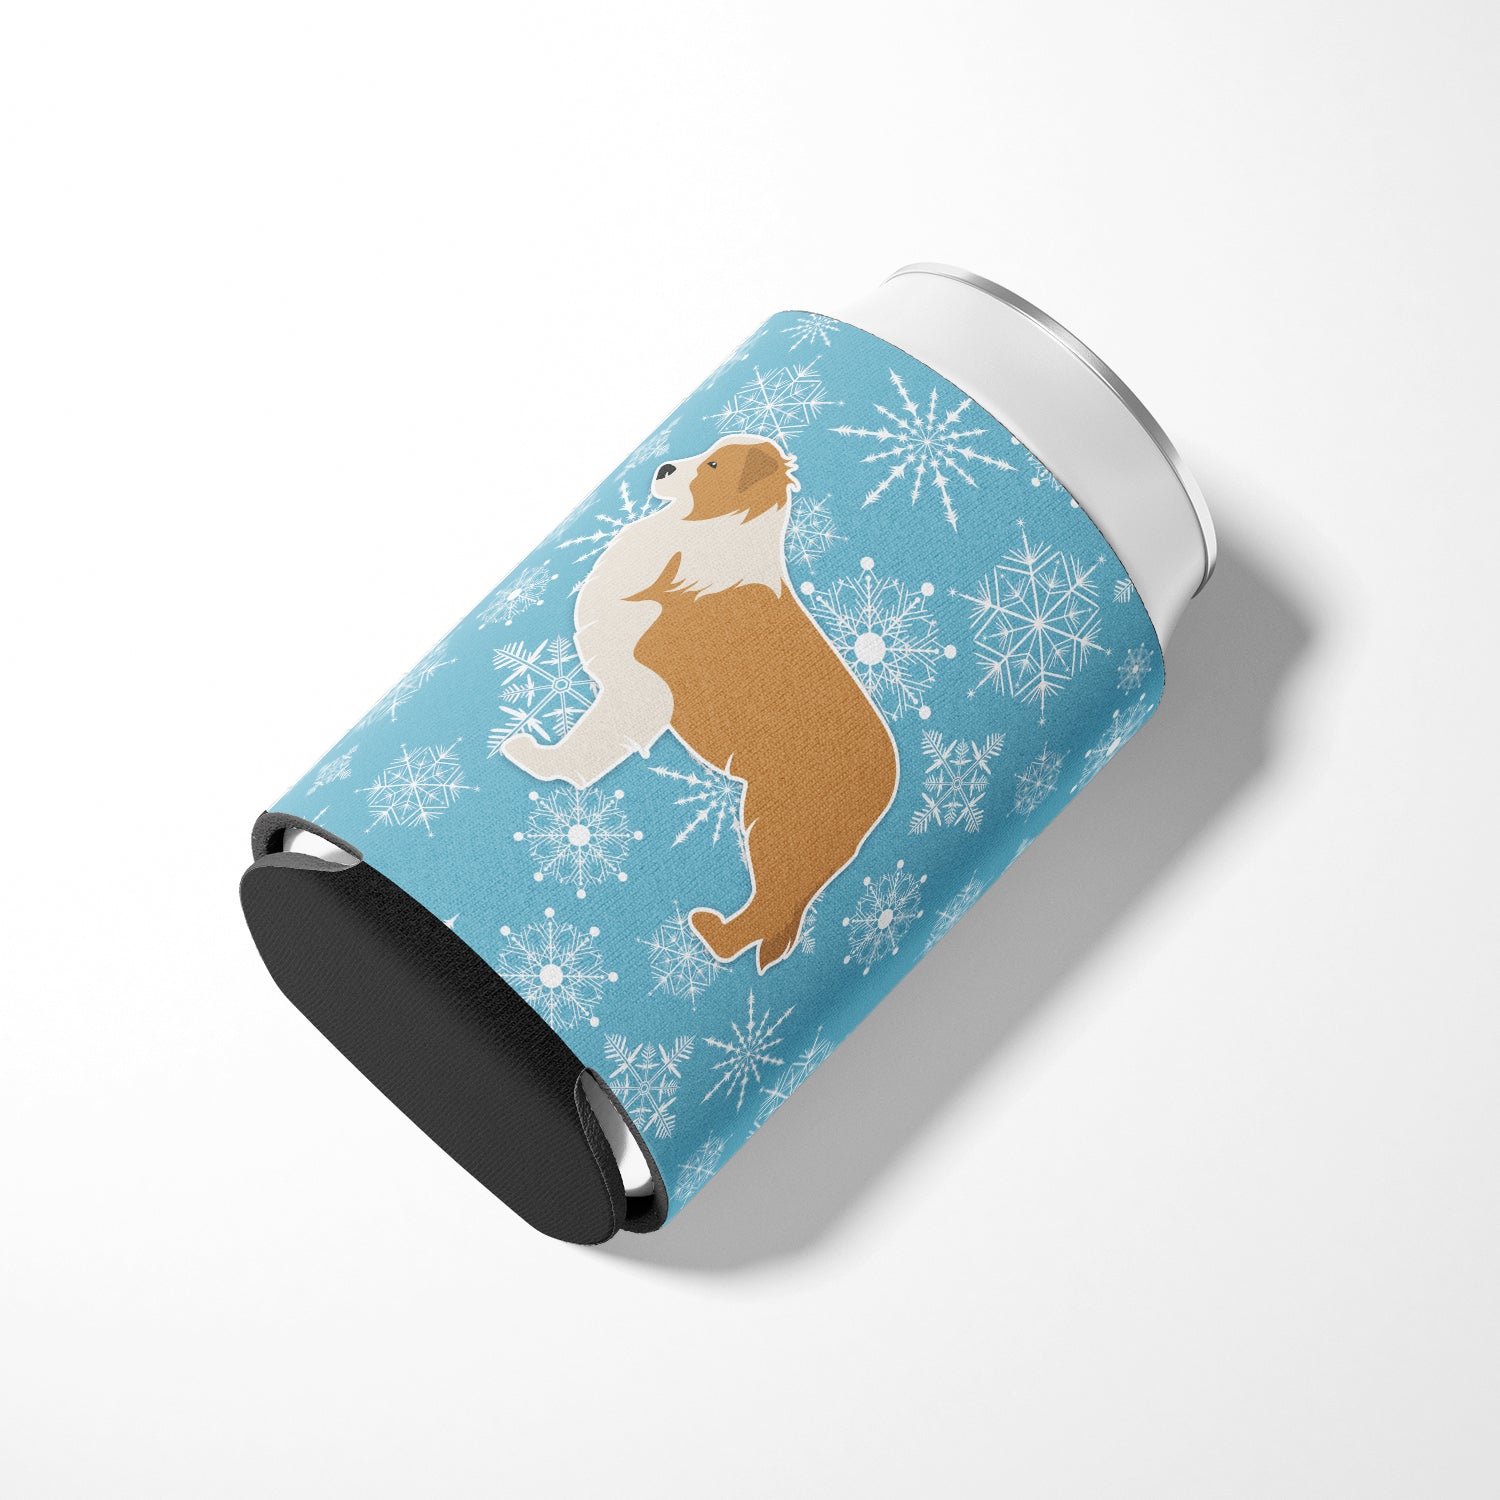 Winter Snowflake Red Border Collie Can or Bottle Hugger BB3522CC  the-store.com.